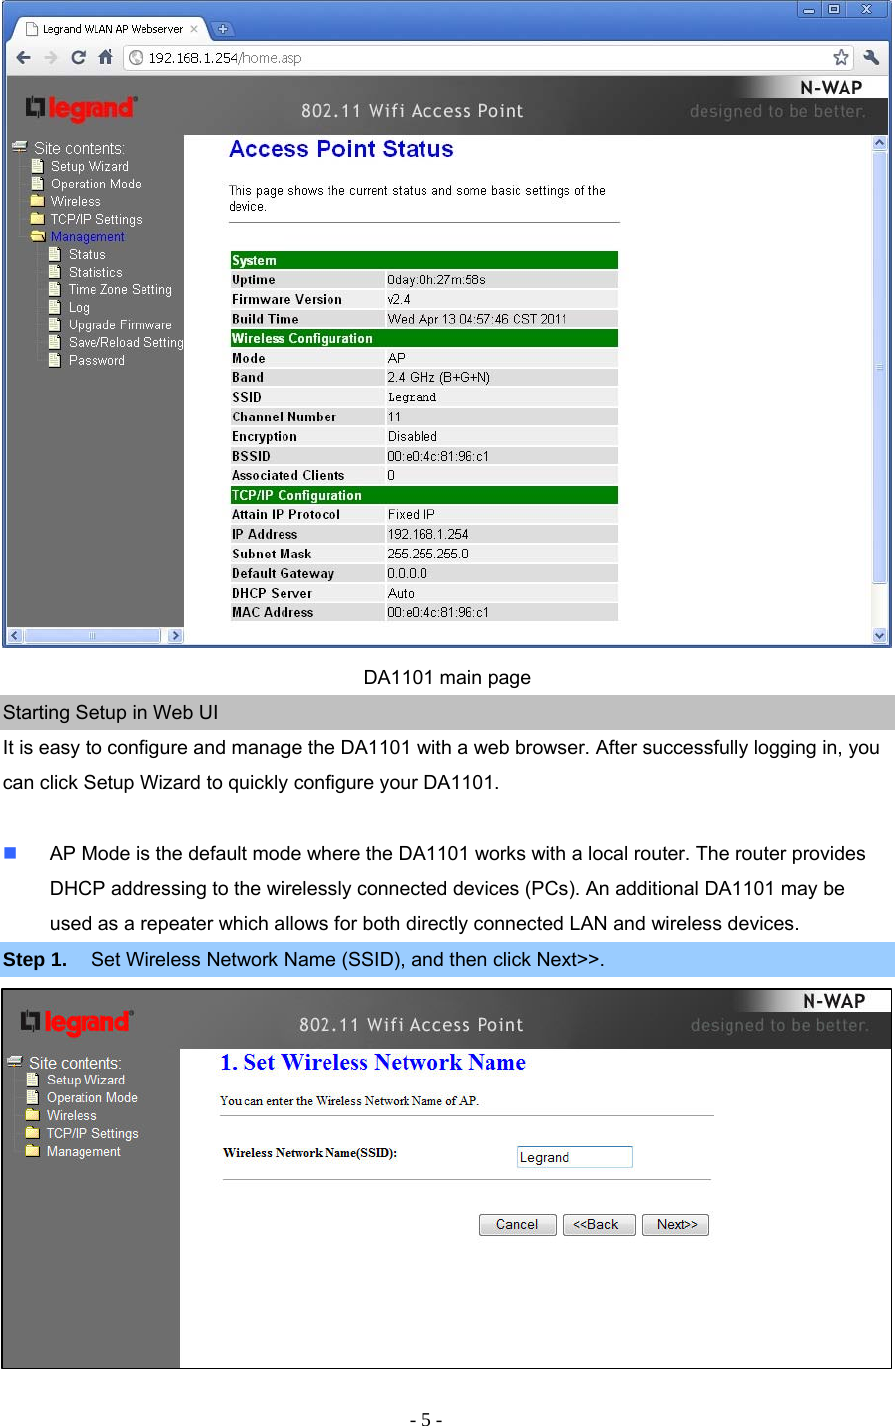 - 5 -  DA1101 main page Starting Setup in Web UI It is easy to configure and manage the DA1101 with a web browser. After successfully logging in, you can click Setup Wizard to quickly configure your DA1101.   AP Mode is the default mode where the DA1101 works with a local router. The router provides DHCP addressing to the wirelessly connected devices (PCs). An additional DA1101 may be used as a repeater which allows for both directly connected LAN and wireless devices.  Step 1.  Set Wireless Network Name (SSID), and then click Next&gt;&gt;.              